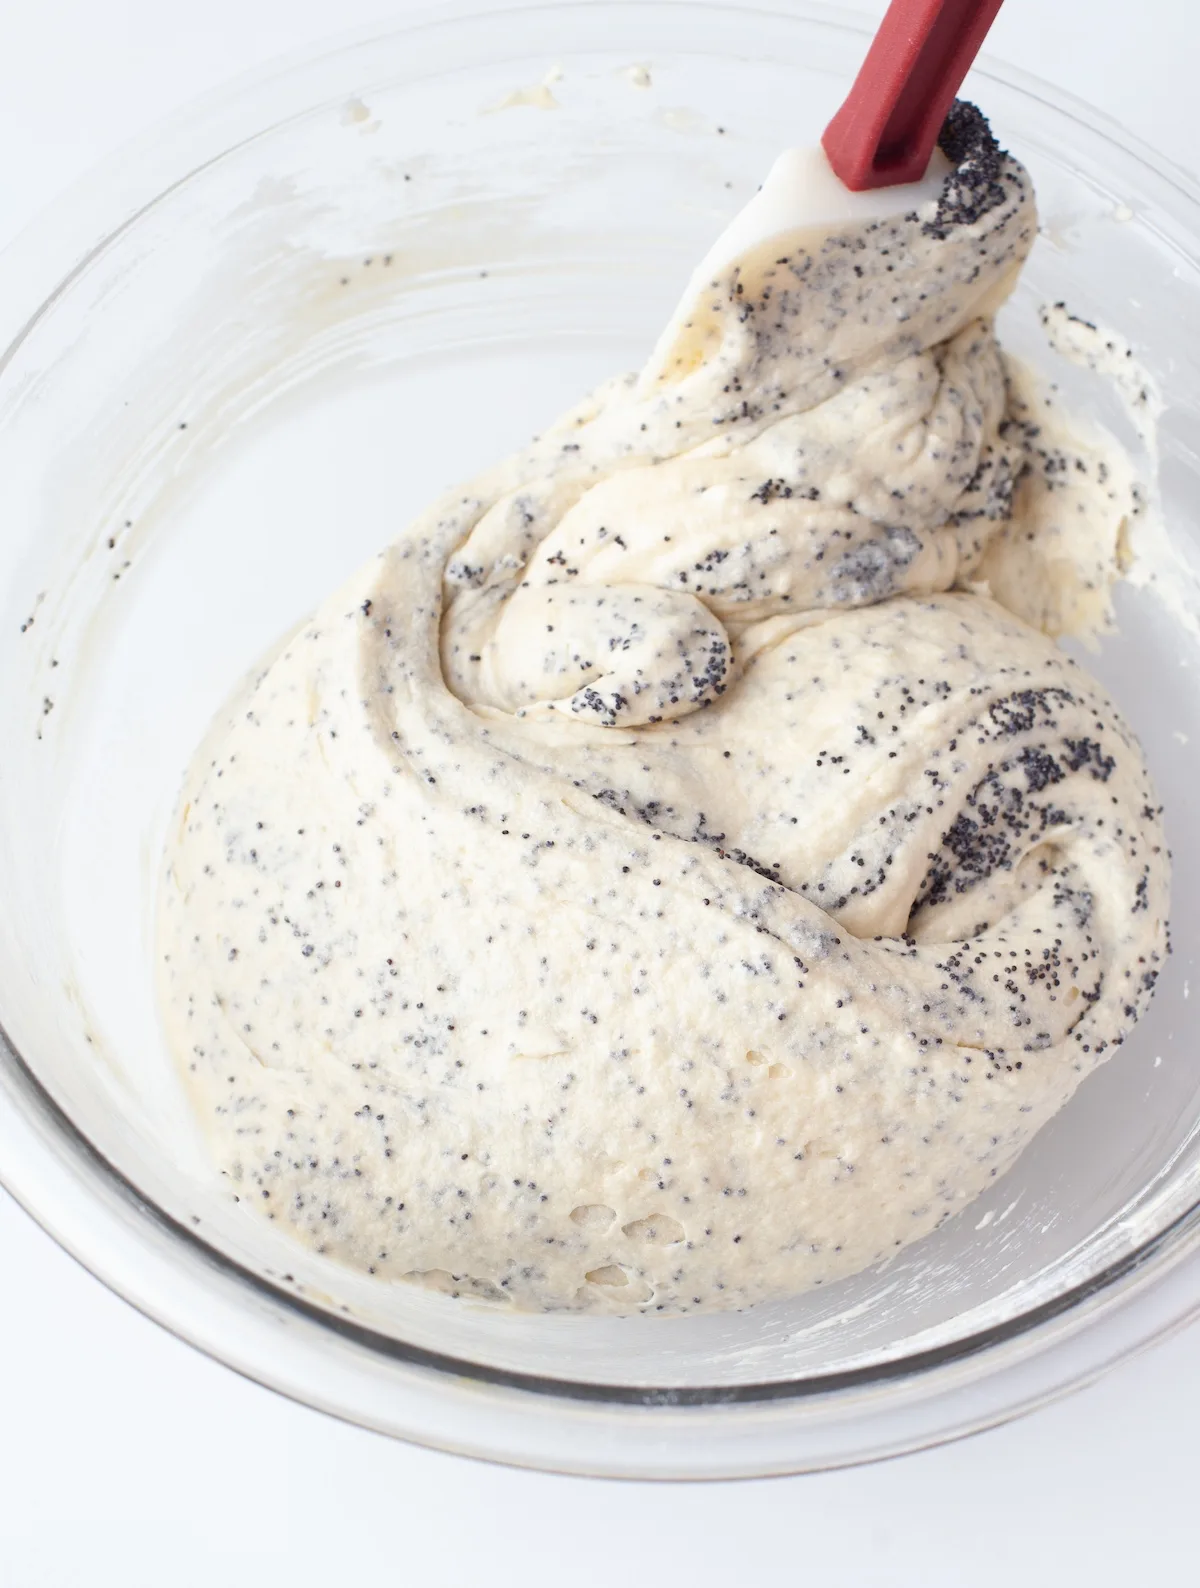 Folding the poppy seeds into the batter with a spatula